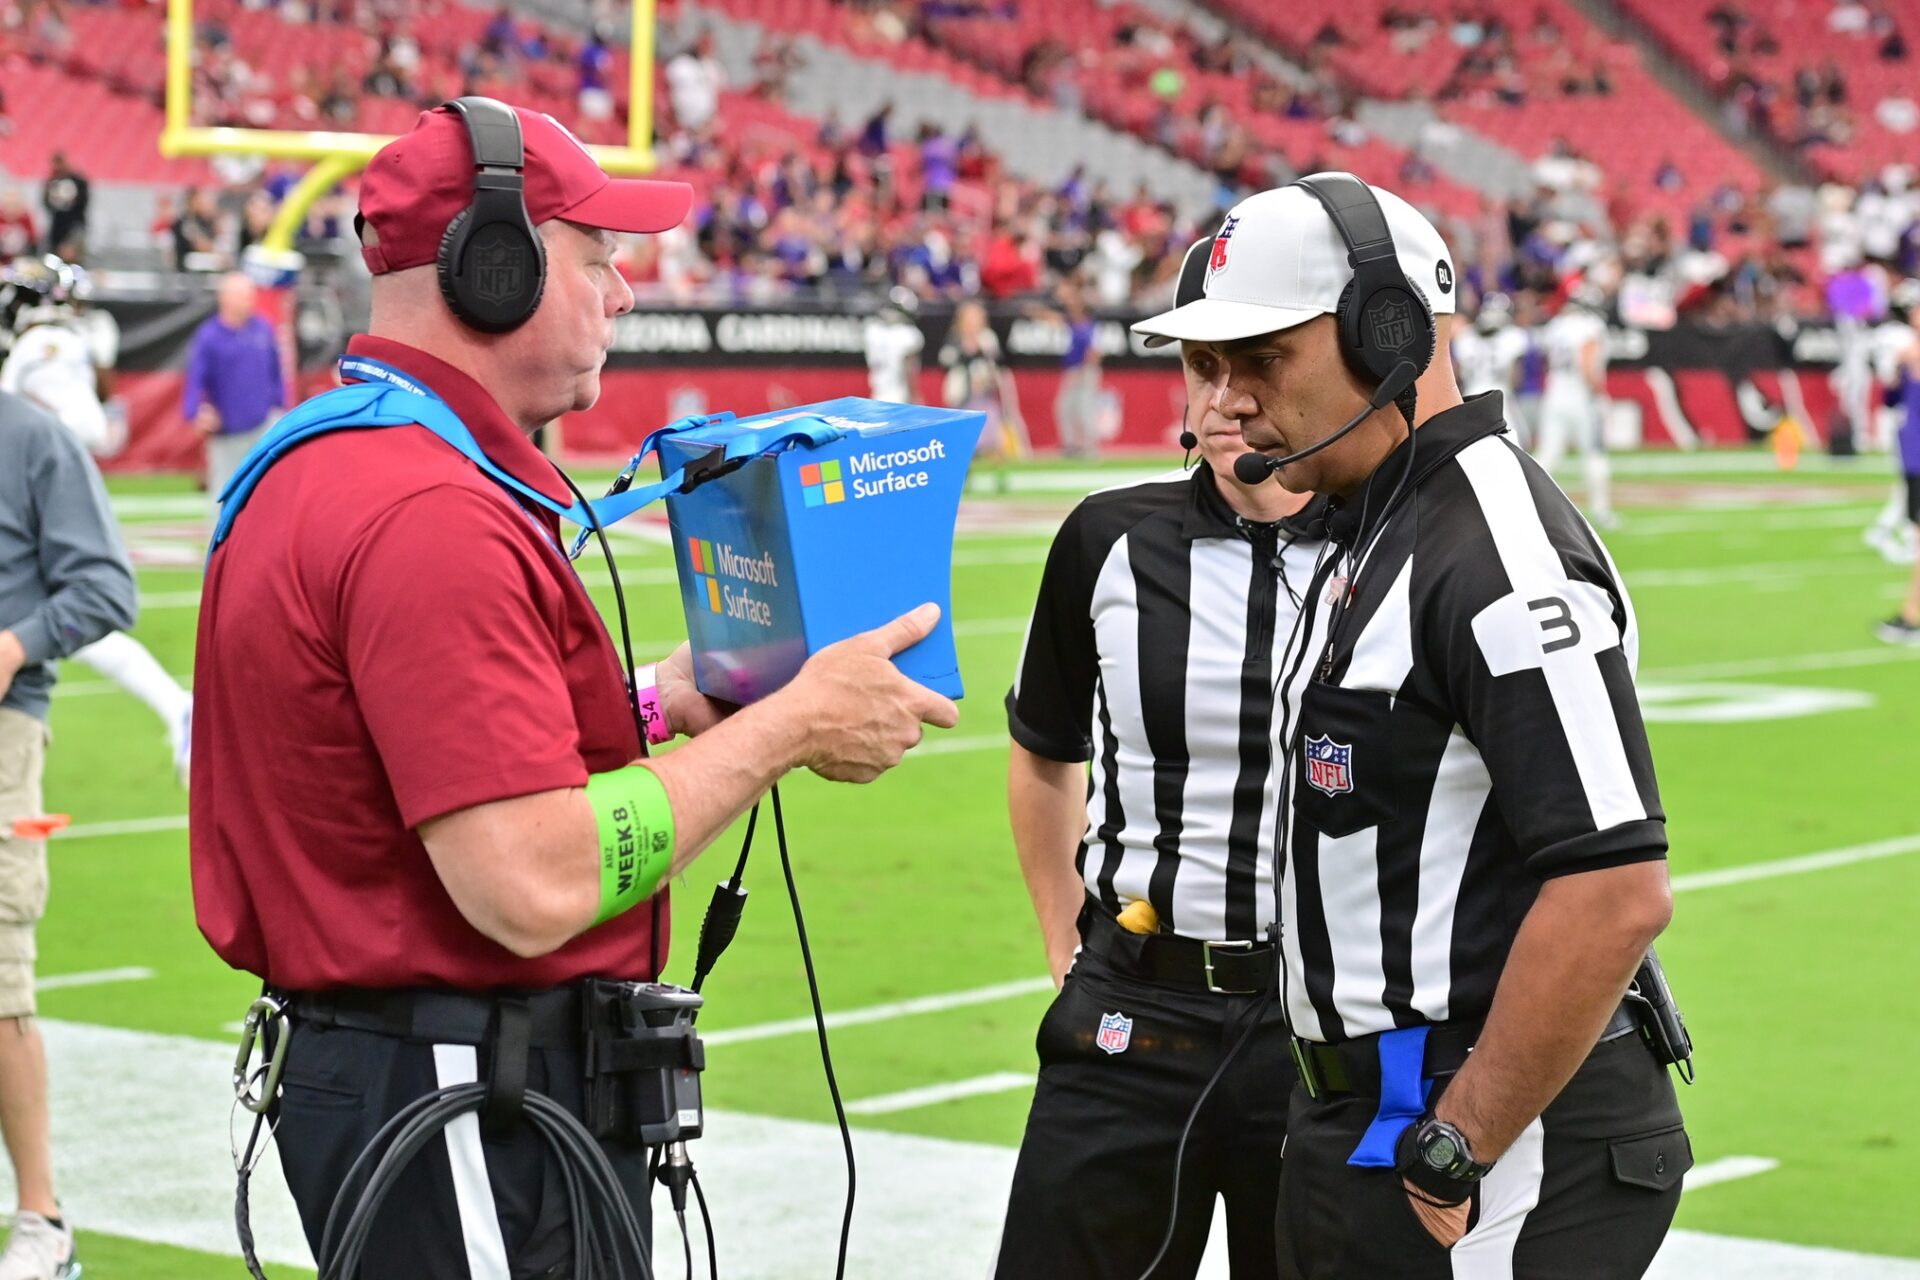 nfl referee assignments for this week